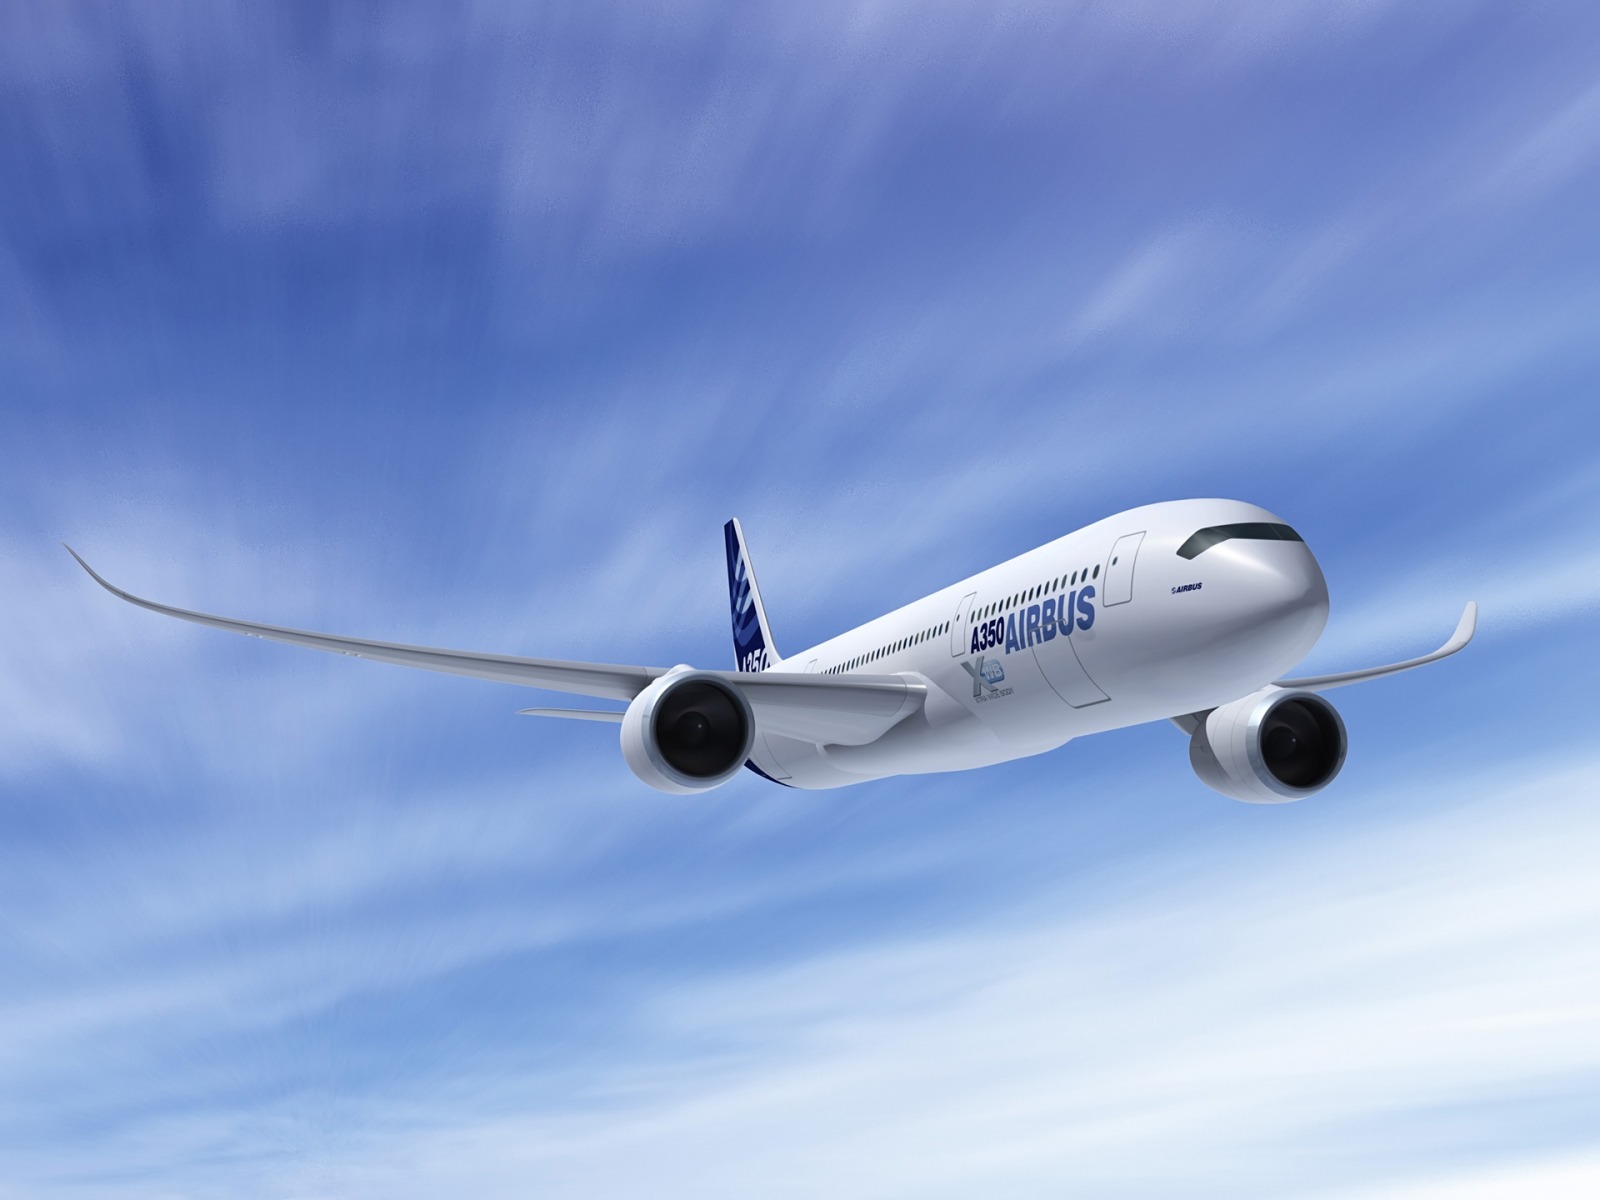 Jet Airlines Airbus A350 Wallpaper